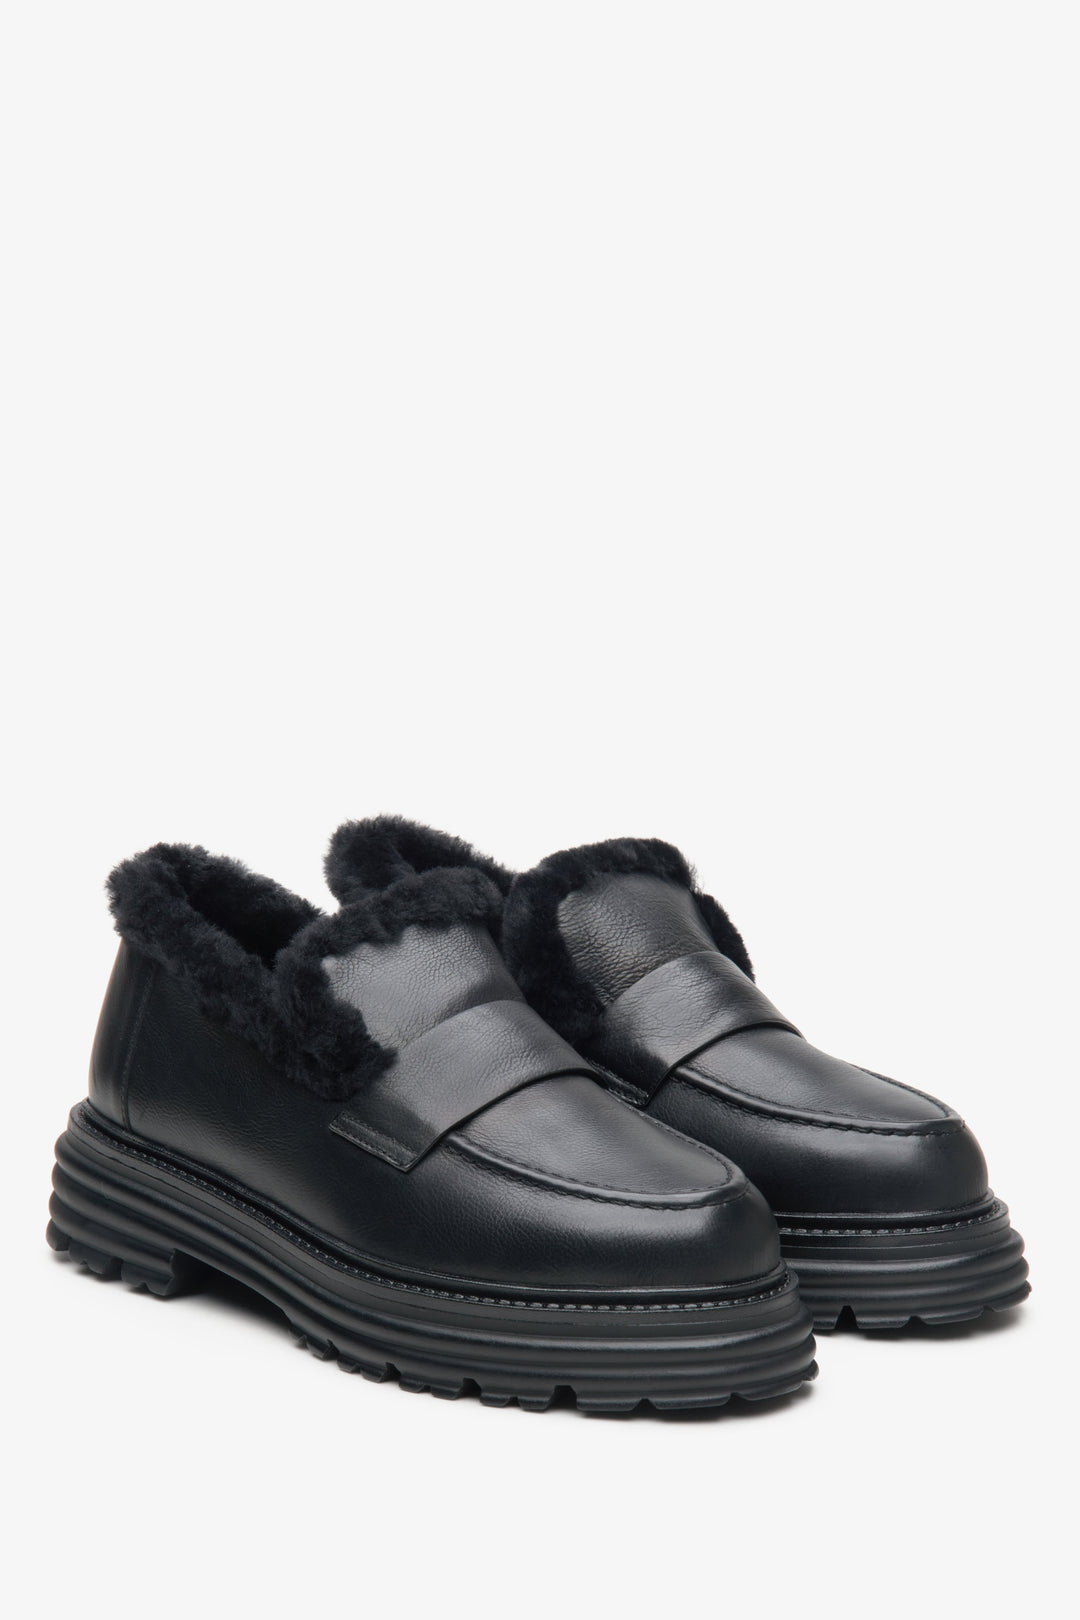 Winter women's moccasins in black with black fur lining by Estro.